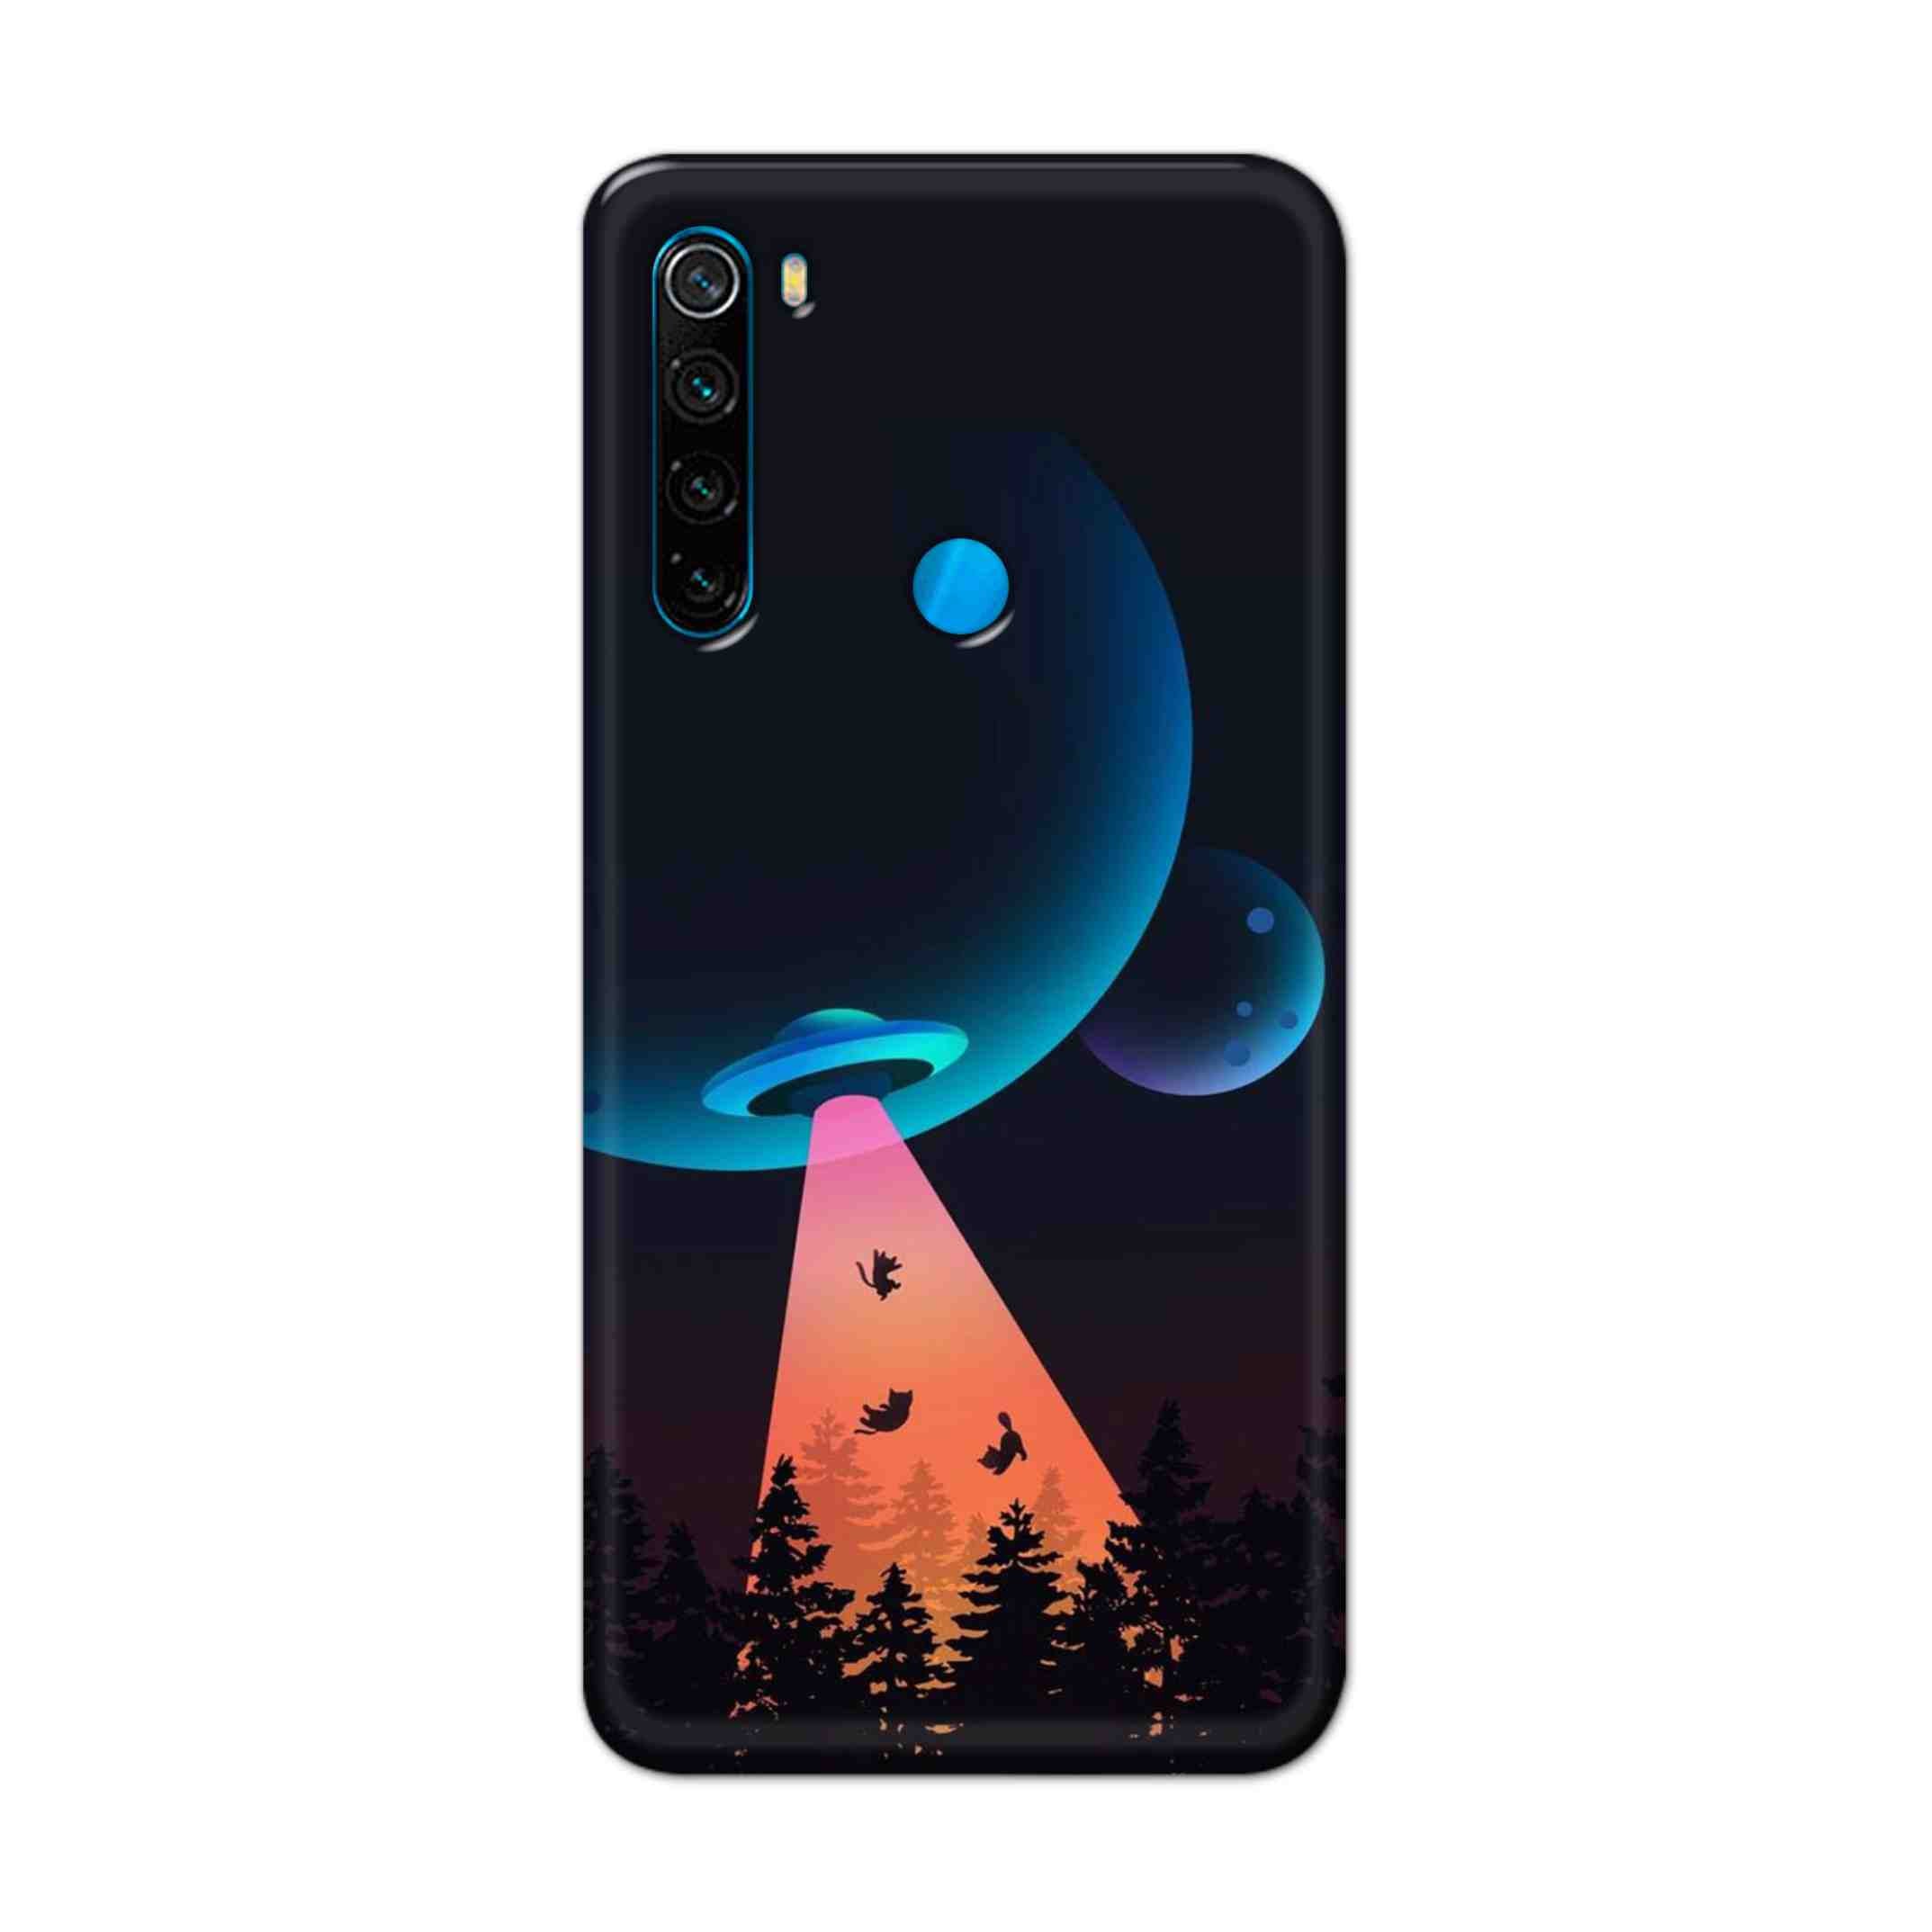 Buy Spaceship Hard Back Mobile Phone Case Cover For Xiaomi Redmi Note 8 Online